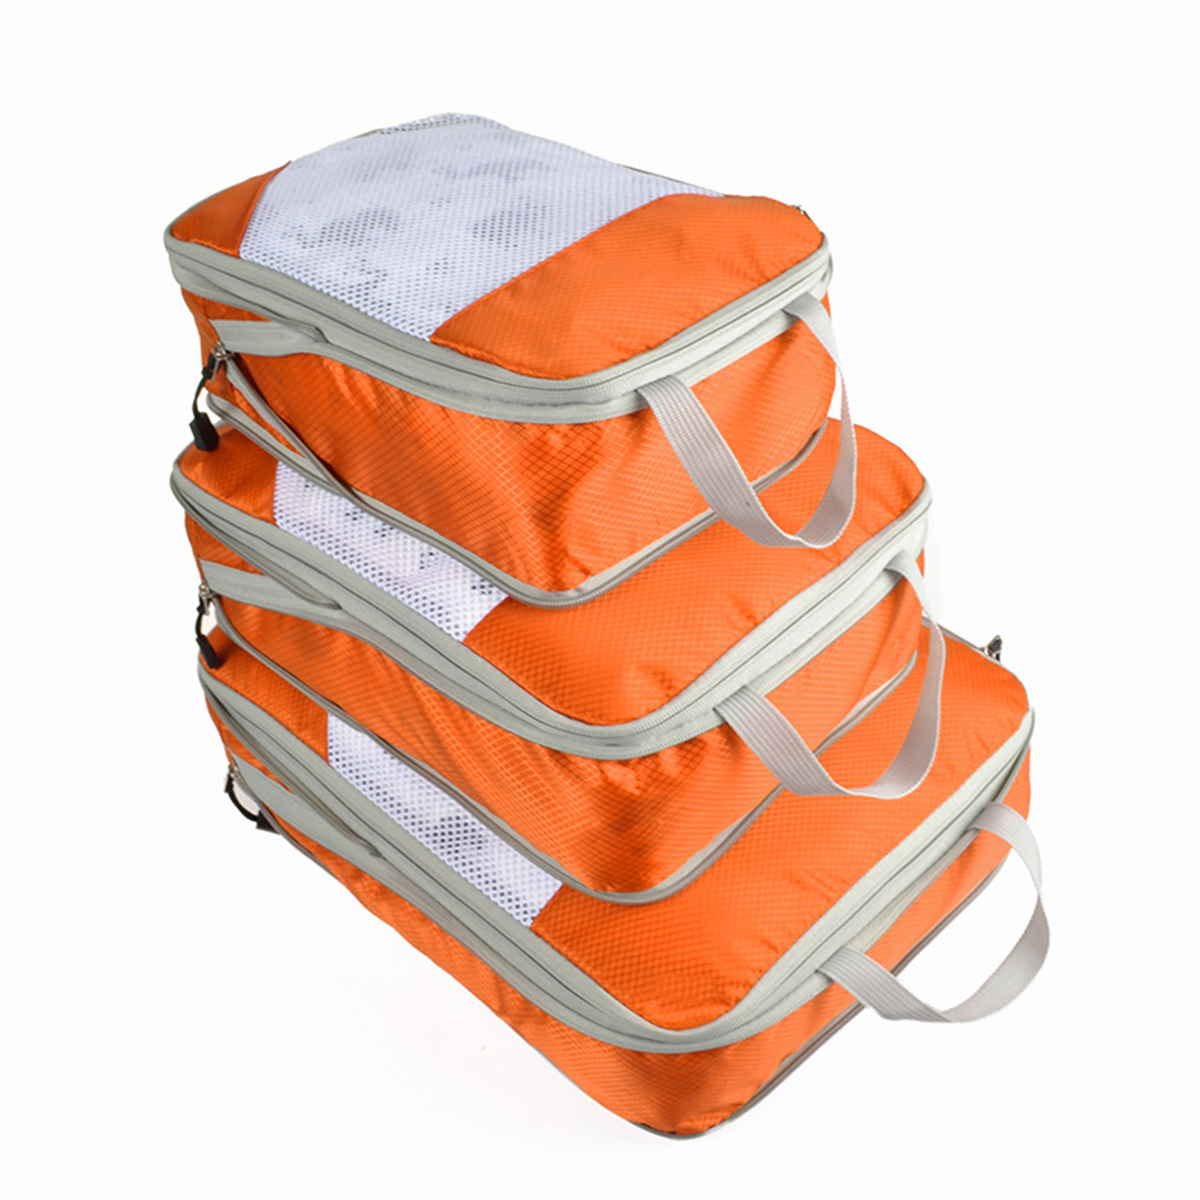 3PCS-Waterproof-Packing-Bags-Outdoor-Traveling-Luggage-Storage-Bag-Clothes-Bags-1603720-8